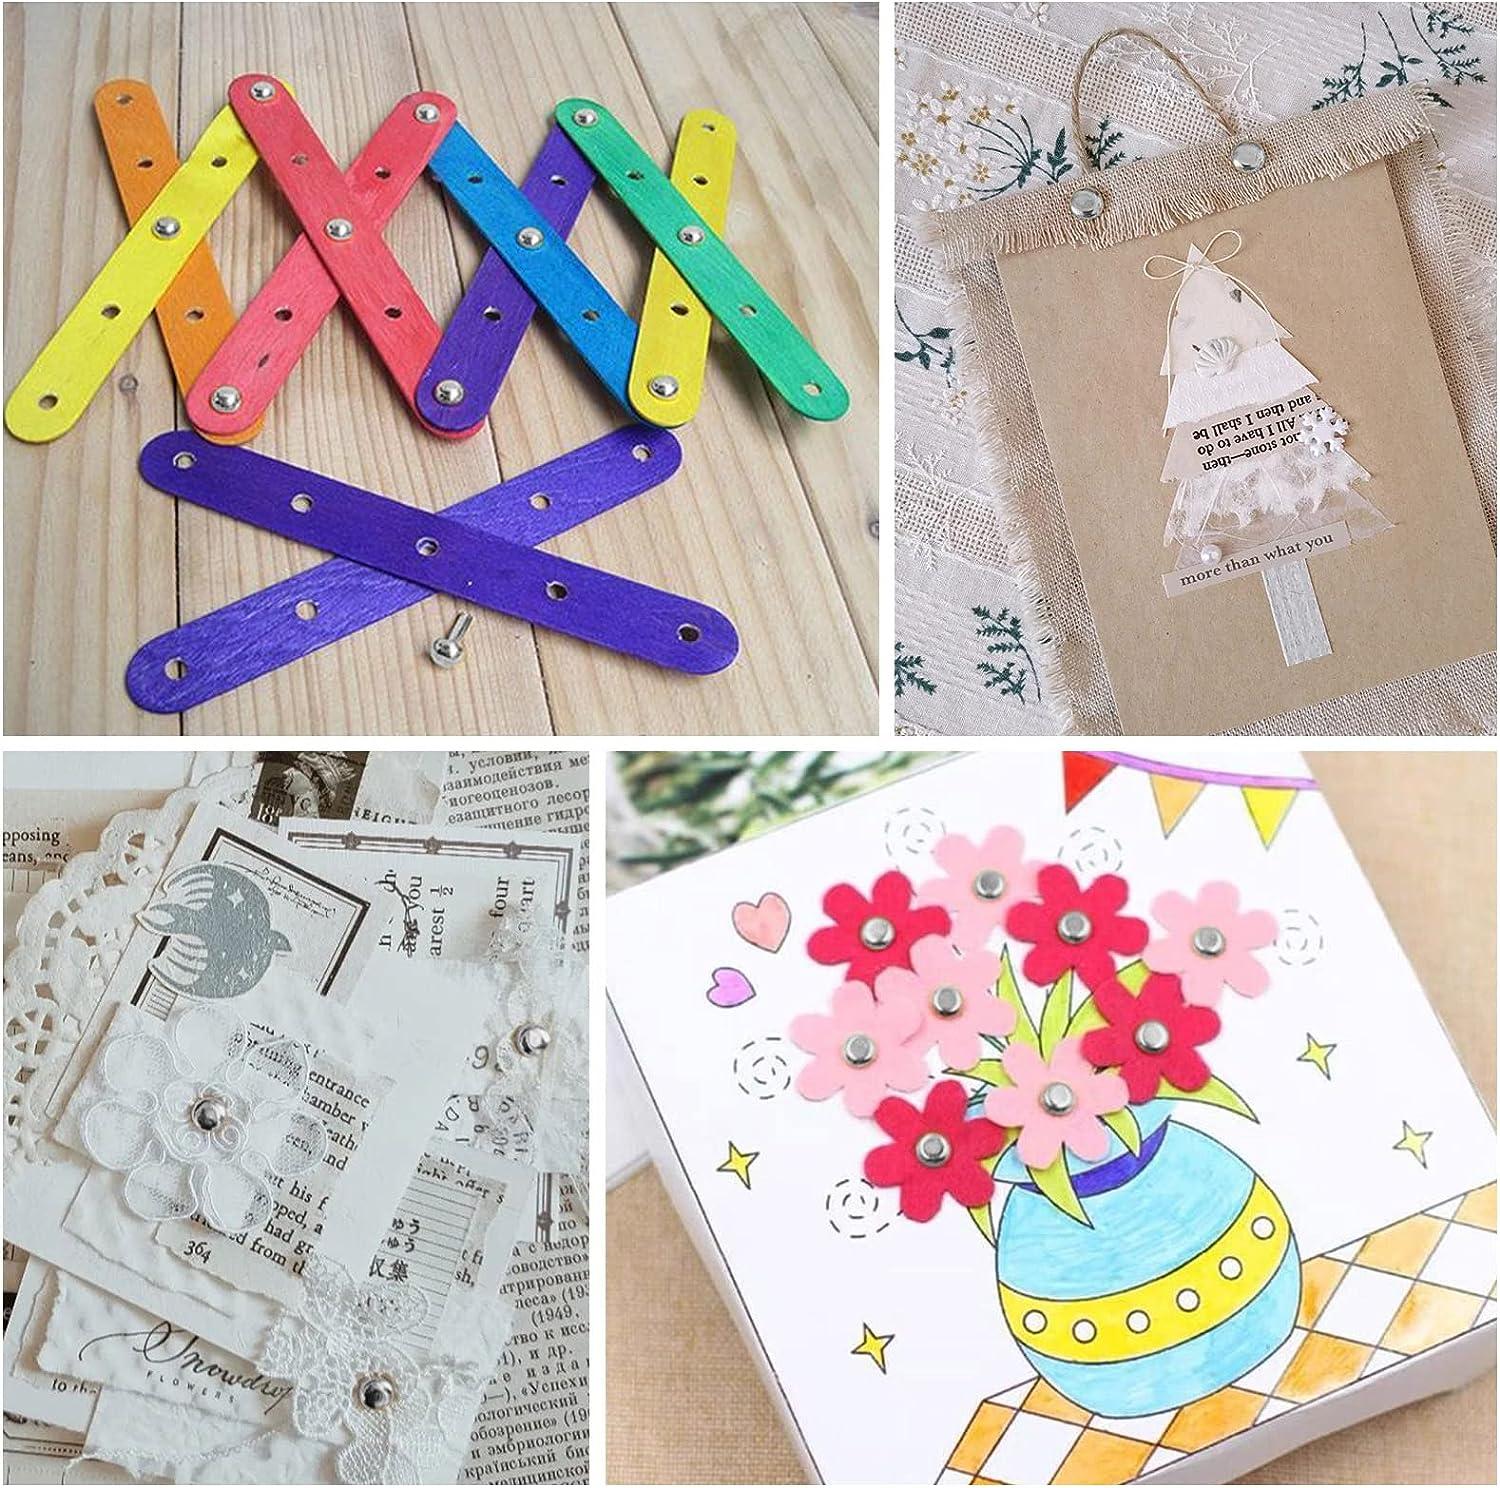 100 Paper Embroidery Cards ideas